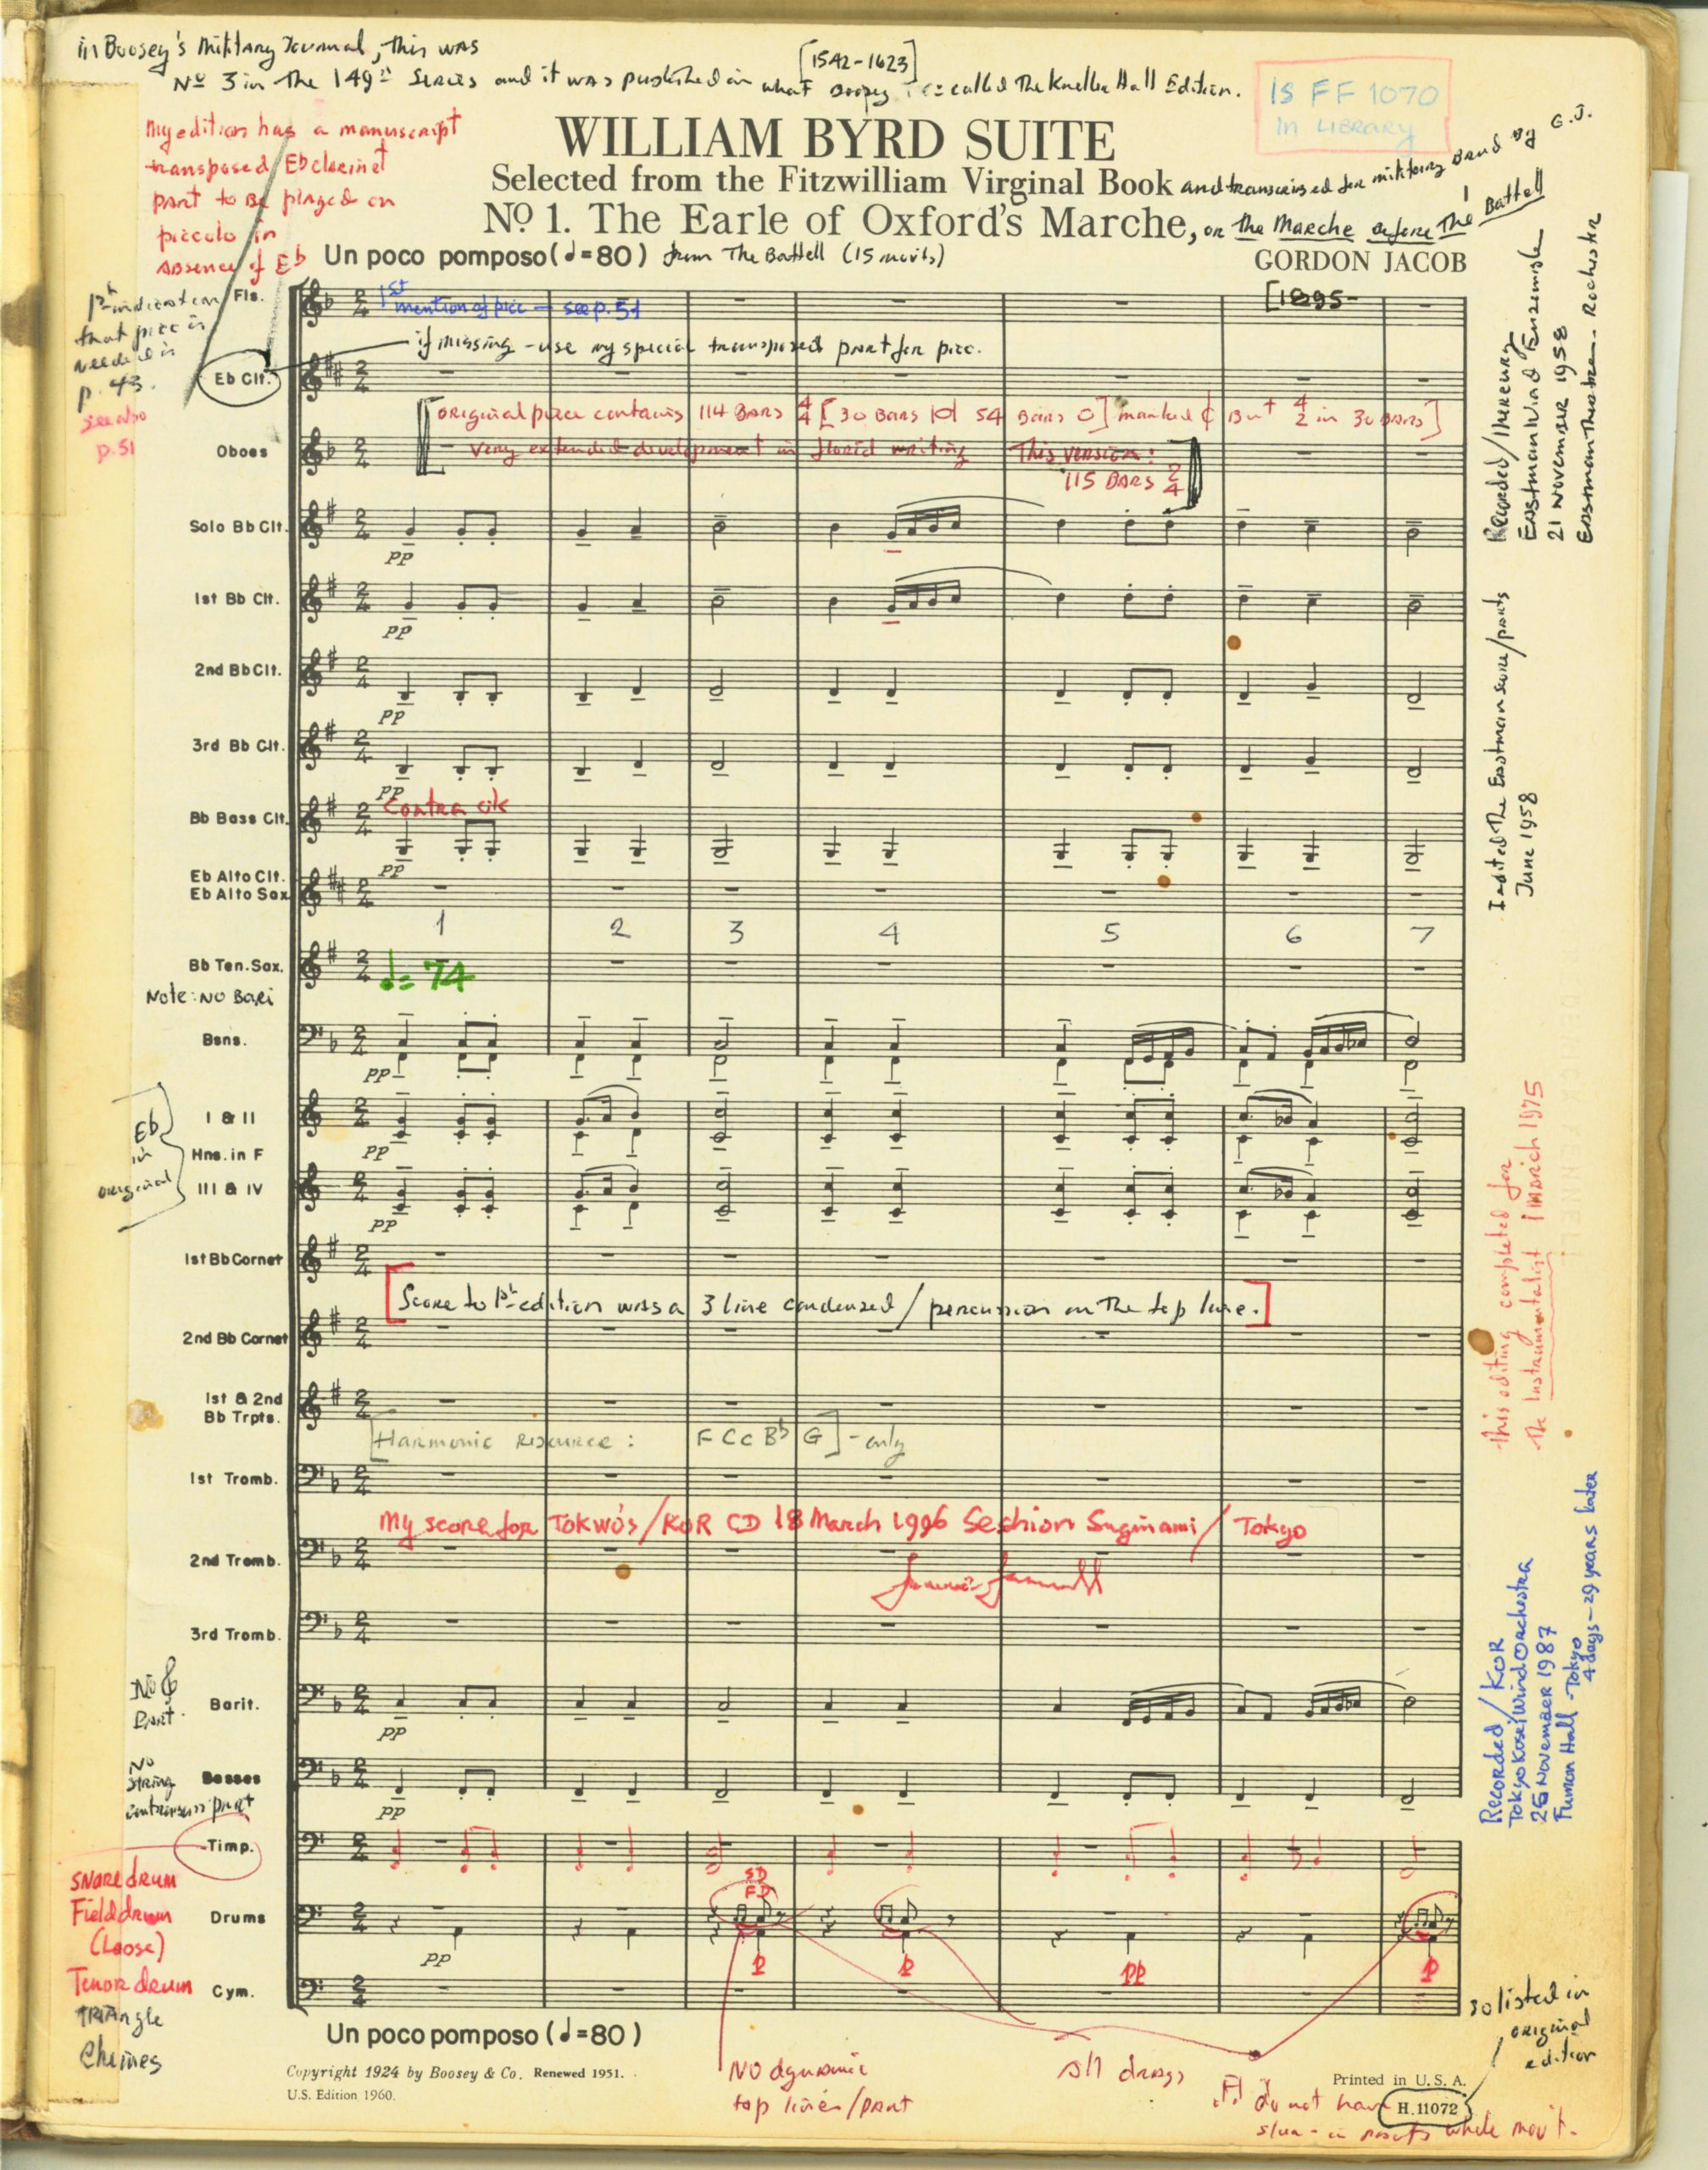 FF1070 first page of music